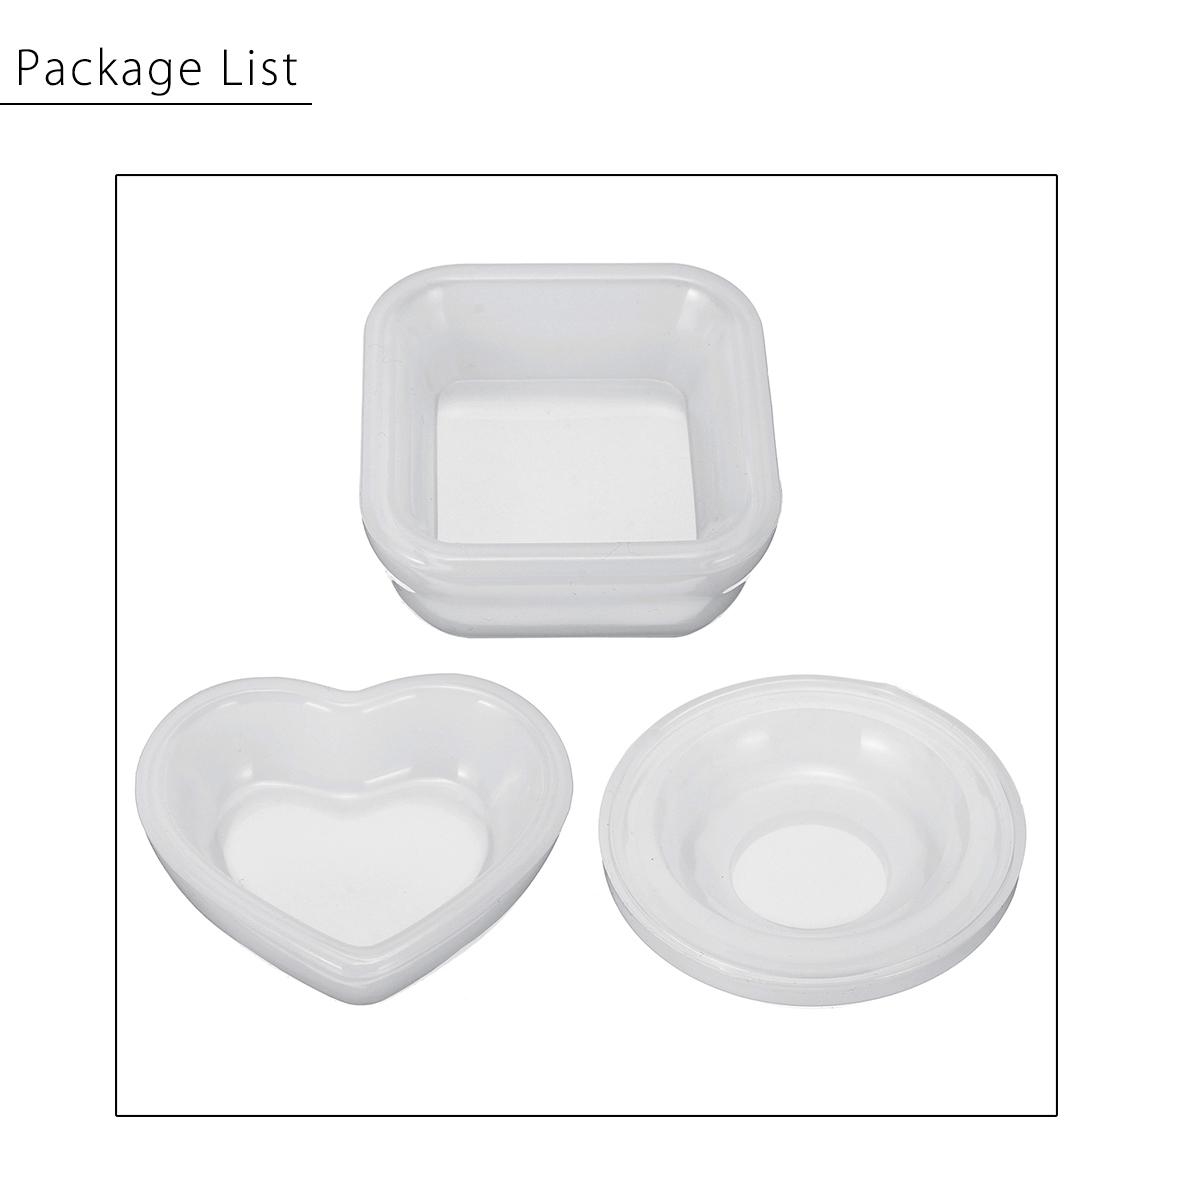 DIY-Resin-Casting-Molds-Heart-Square-Round-Shape-Mod-Clear-Silicone-Craft-Making-Mould-1526984-10